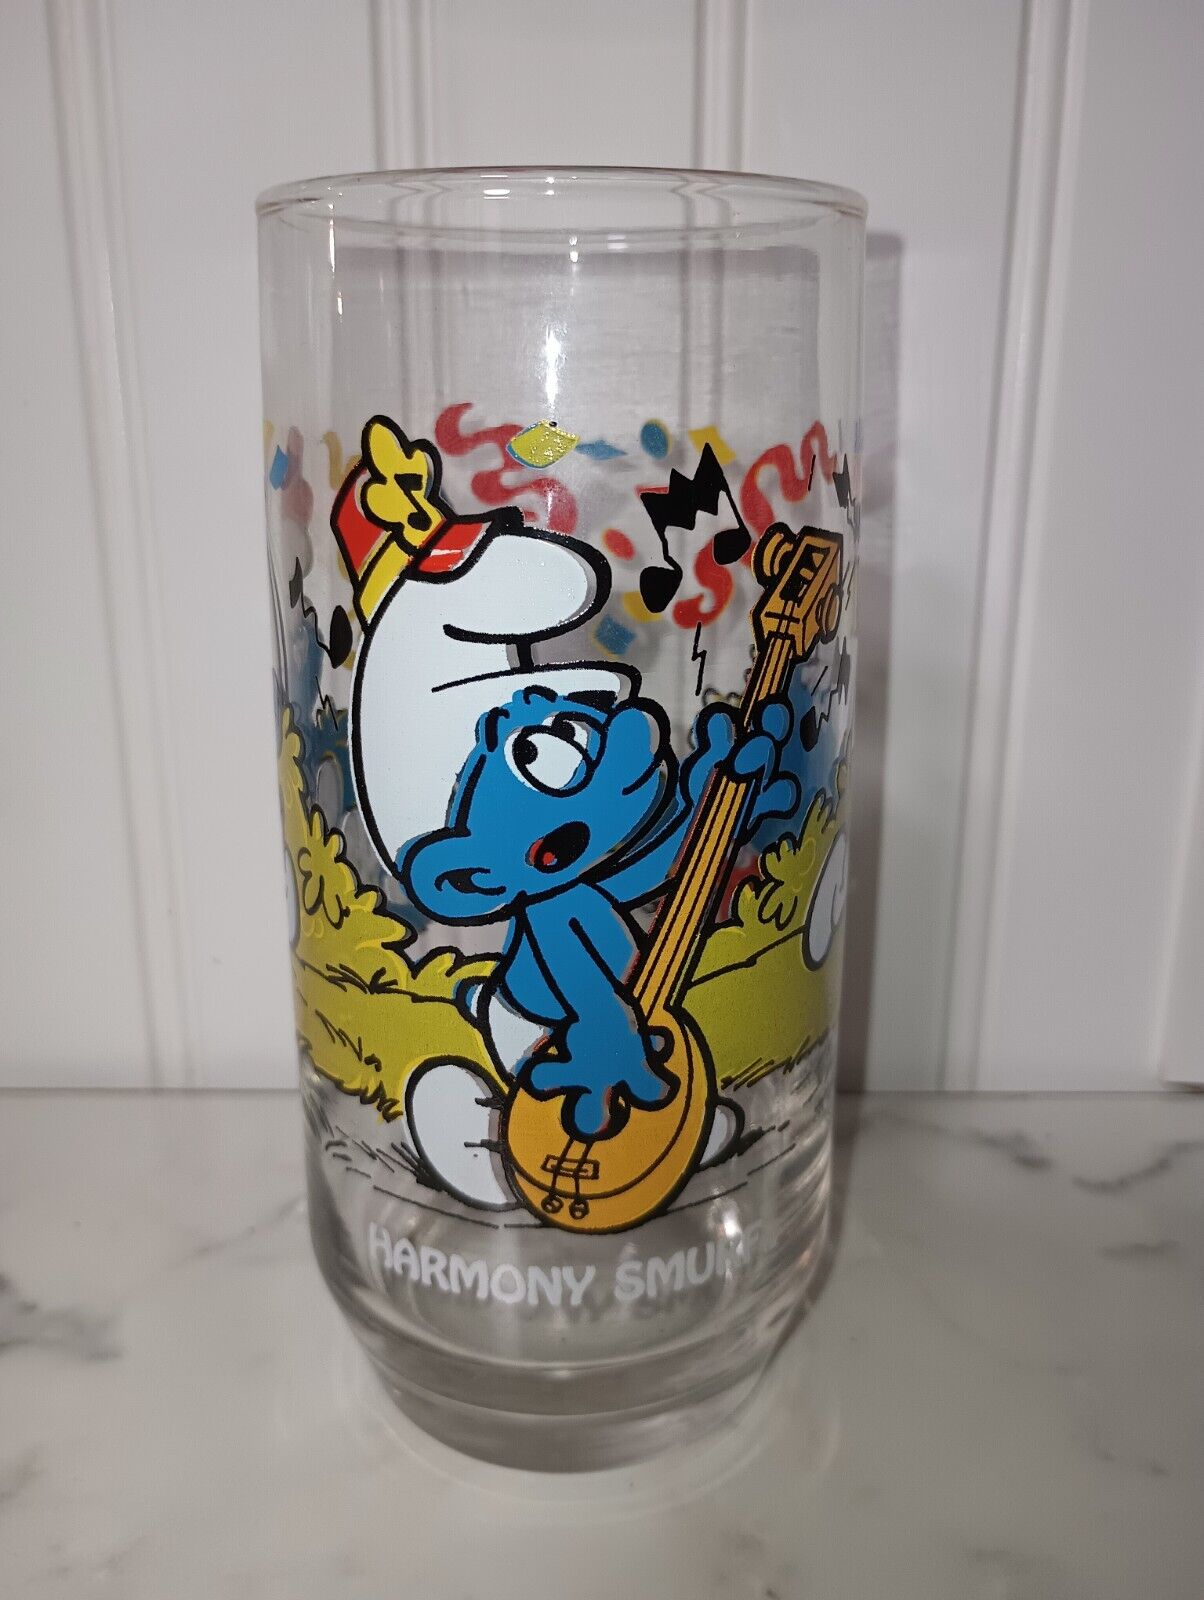 Vintage 1983 Peyo Harmony Smurf Drinking Glass Preowned. Great Condition